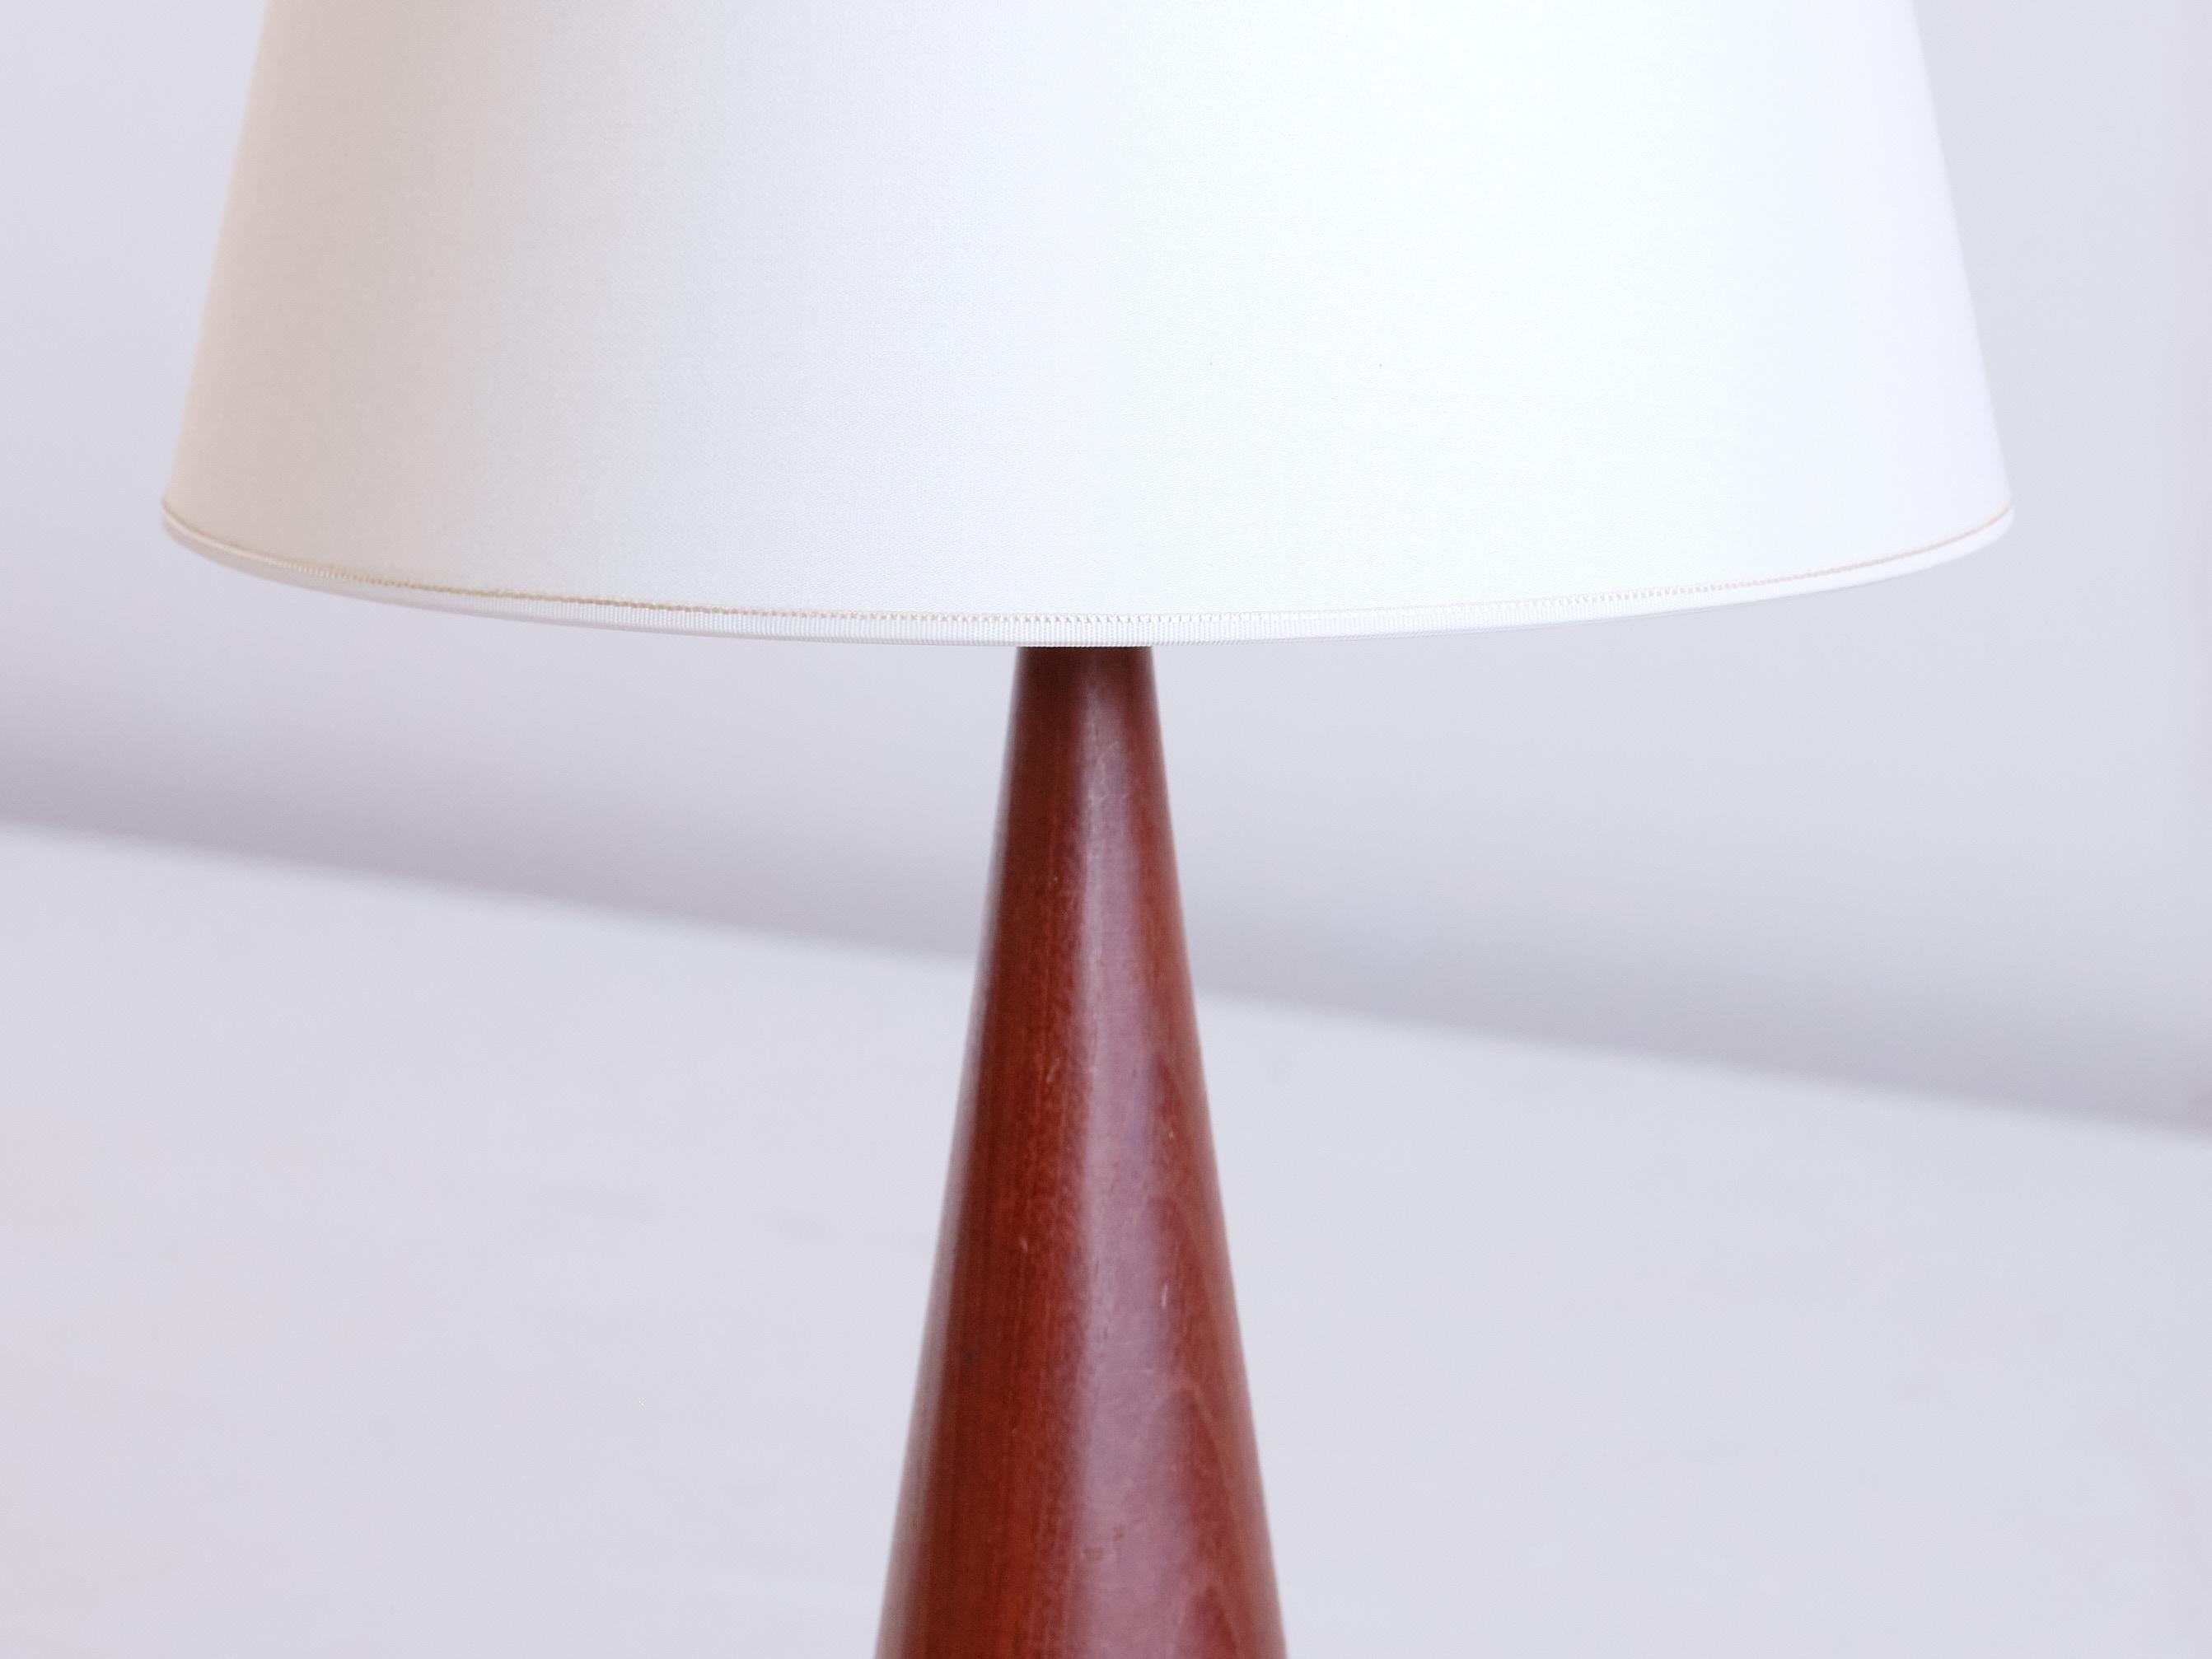 Mid-20th Century Sculptural Table Lamp in Teak Wood and Ivory Drum Shade, Denmark, 1960s For Sale